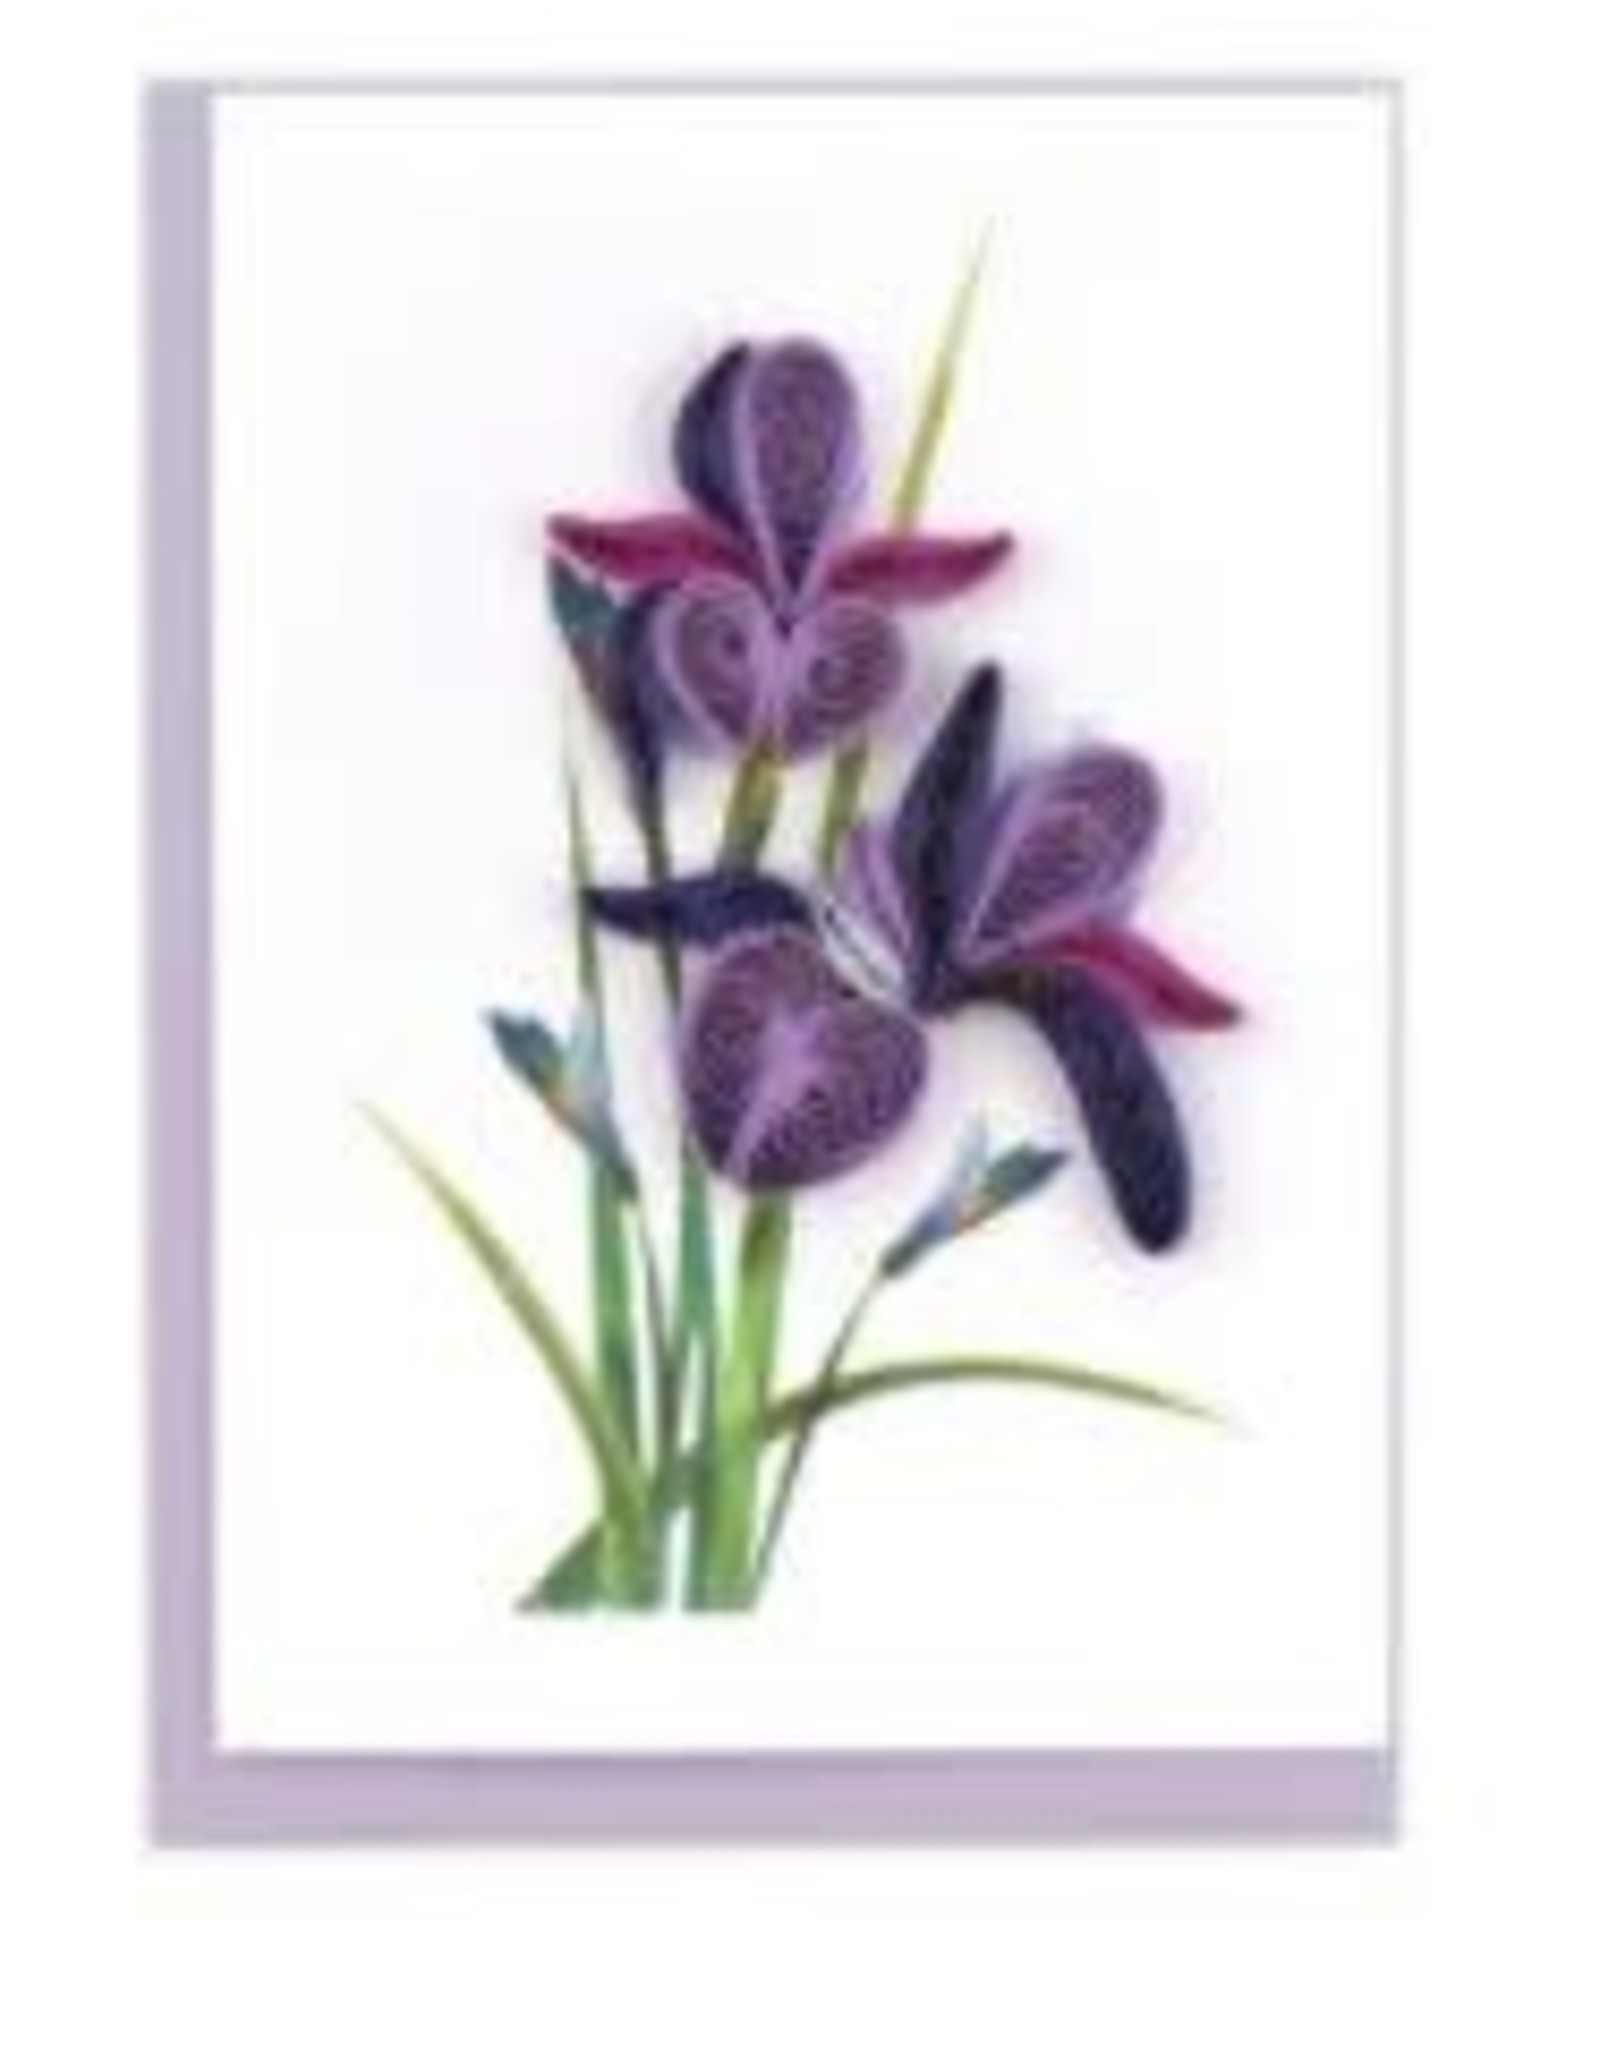 Quilling Card Sm- Purple Flower